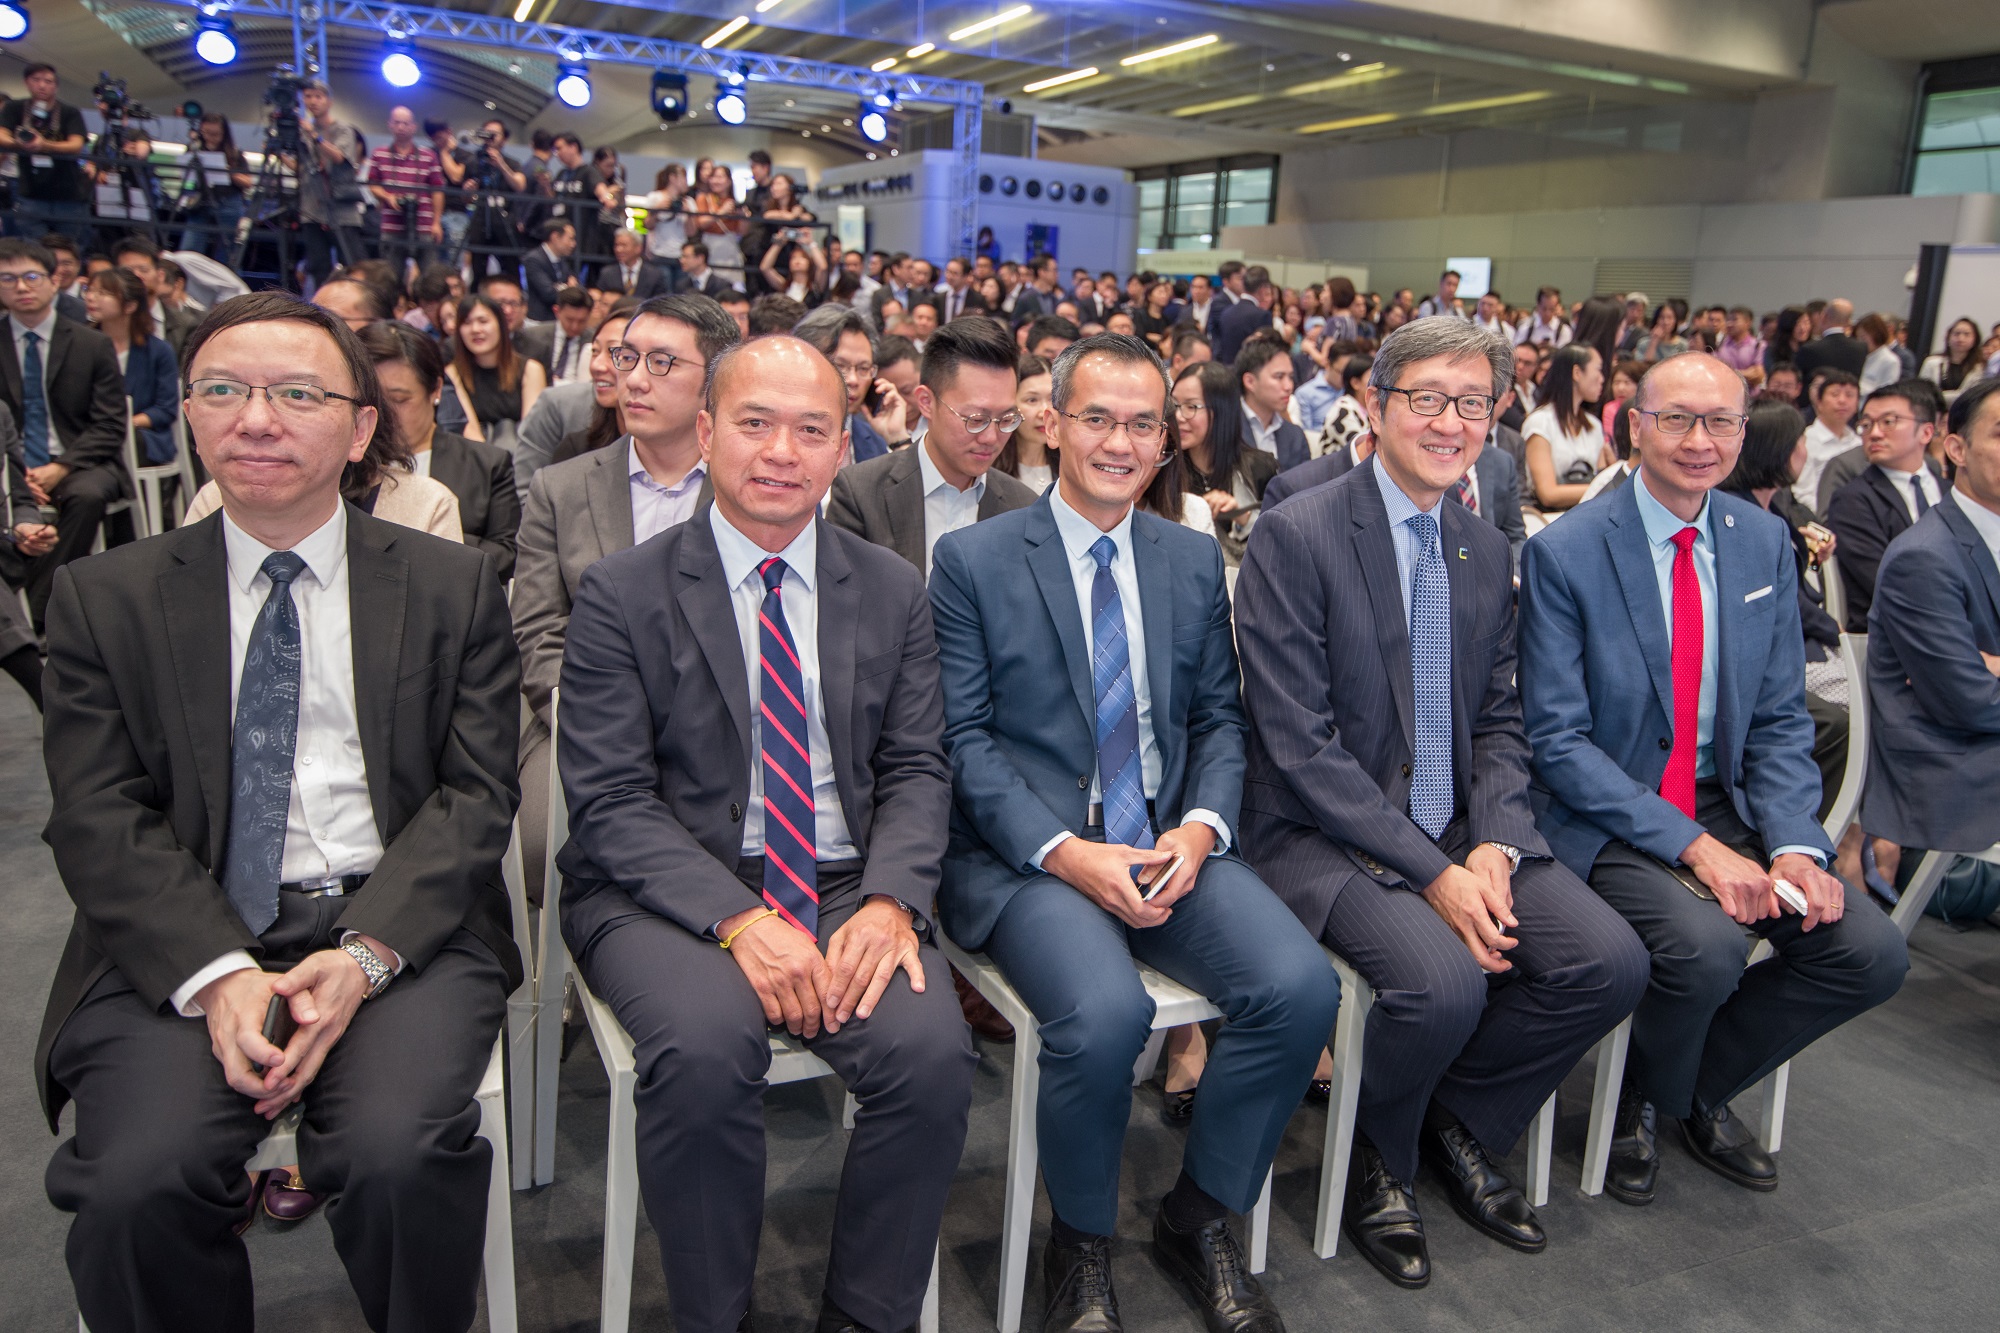 Mr. Victor Lam, Government Chief Information Officer at the "HKT 5G Tech Carnival" with other Guests.